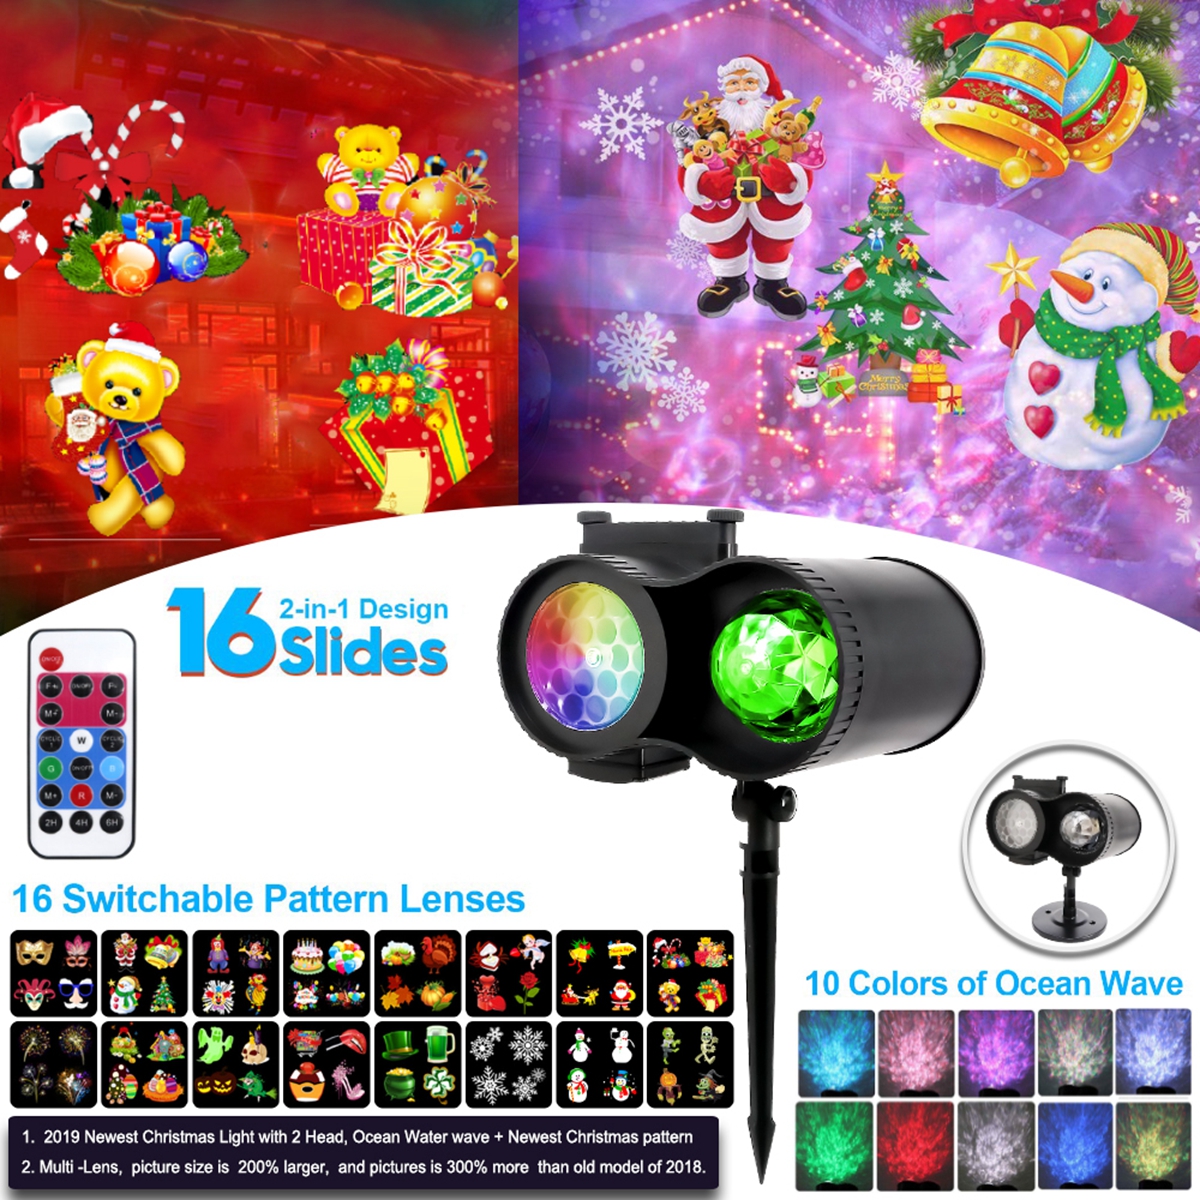 64-Patterns-LED-Christmas-Snowflake-Projector-Light-Outdoor-Lawn-Lamp-Waterproof-1619615-1